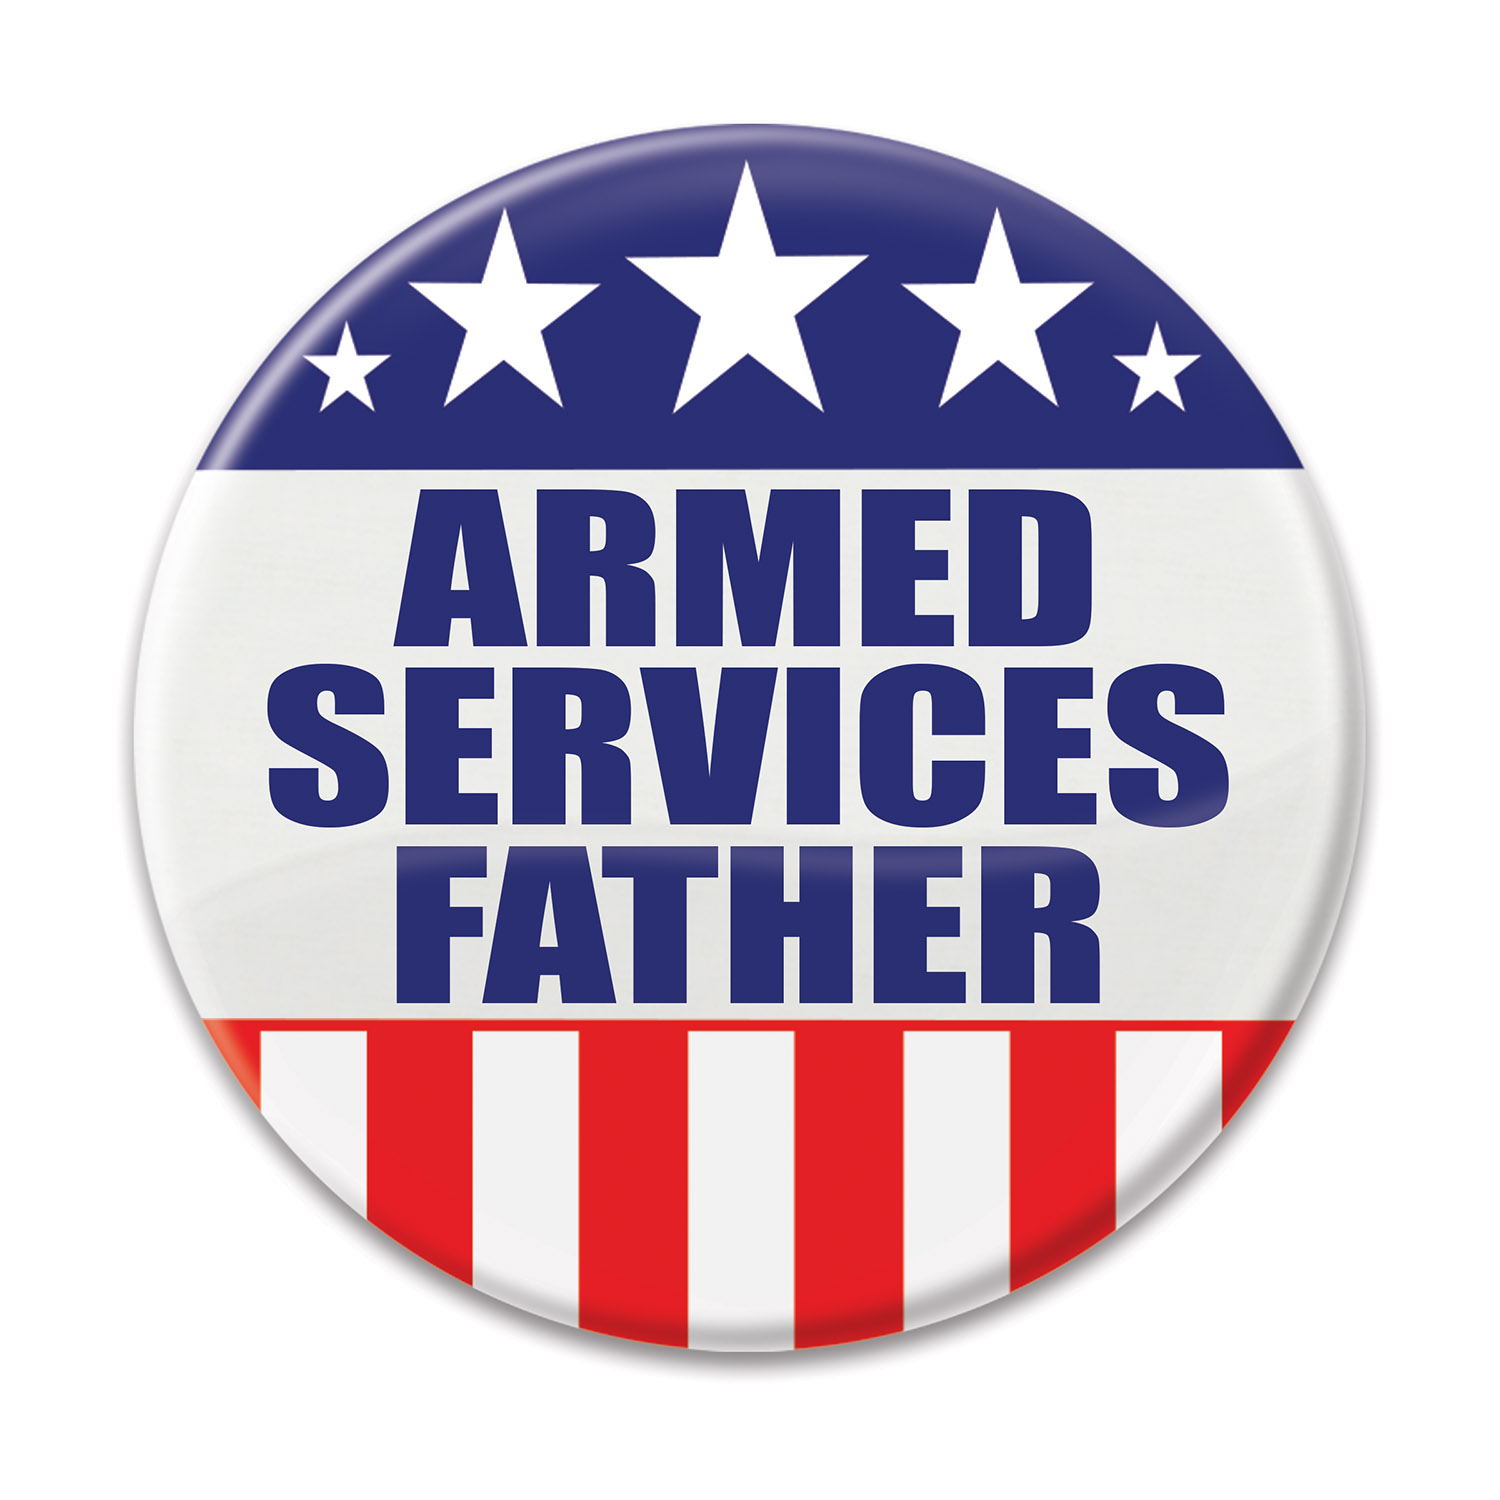 Image of ARMED SERVICES FATHER BUTTON (6)